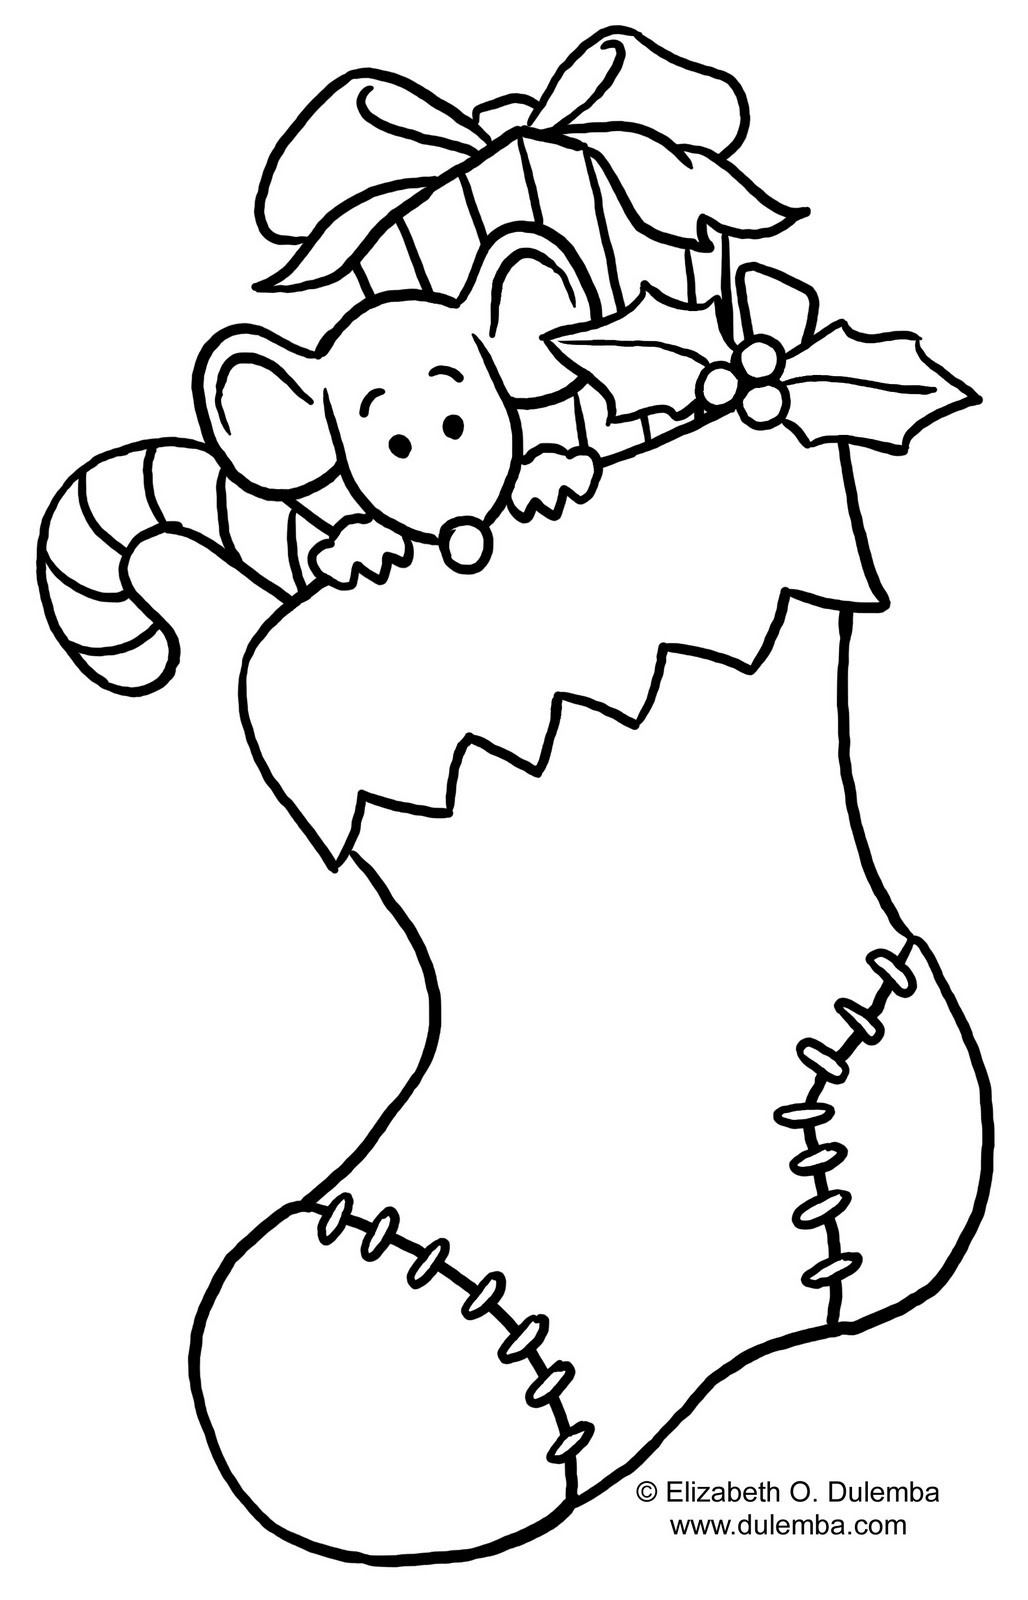 Christmas Coloring Pages 2010 Coloring Wallpapers Download Free Images Wallpaper [coloring654.blogspot.com]